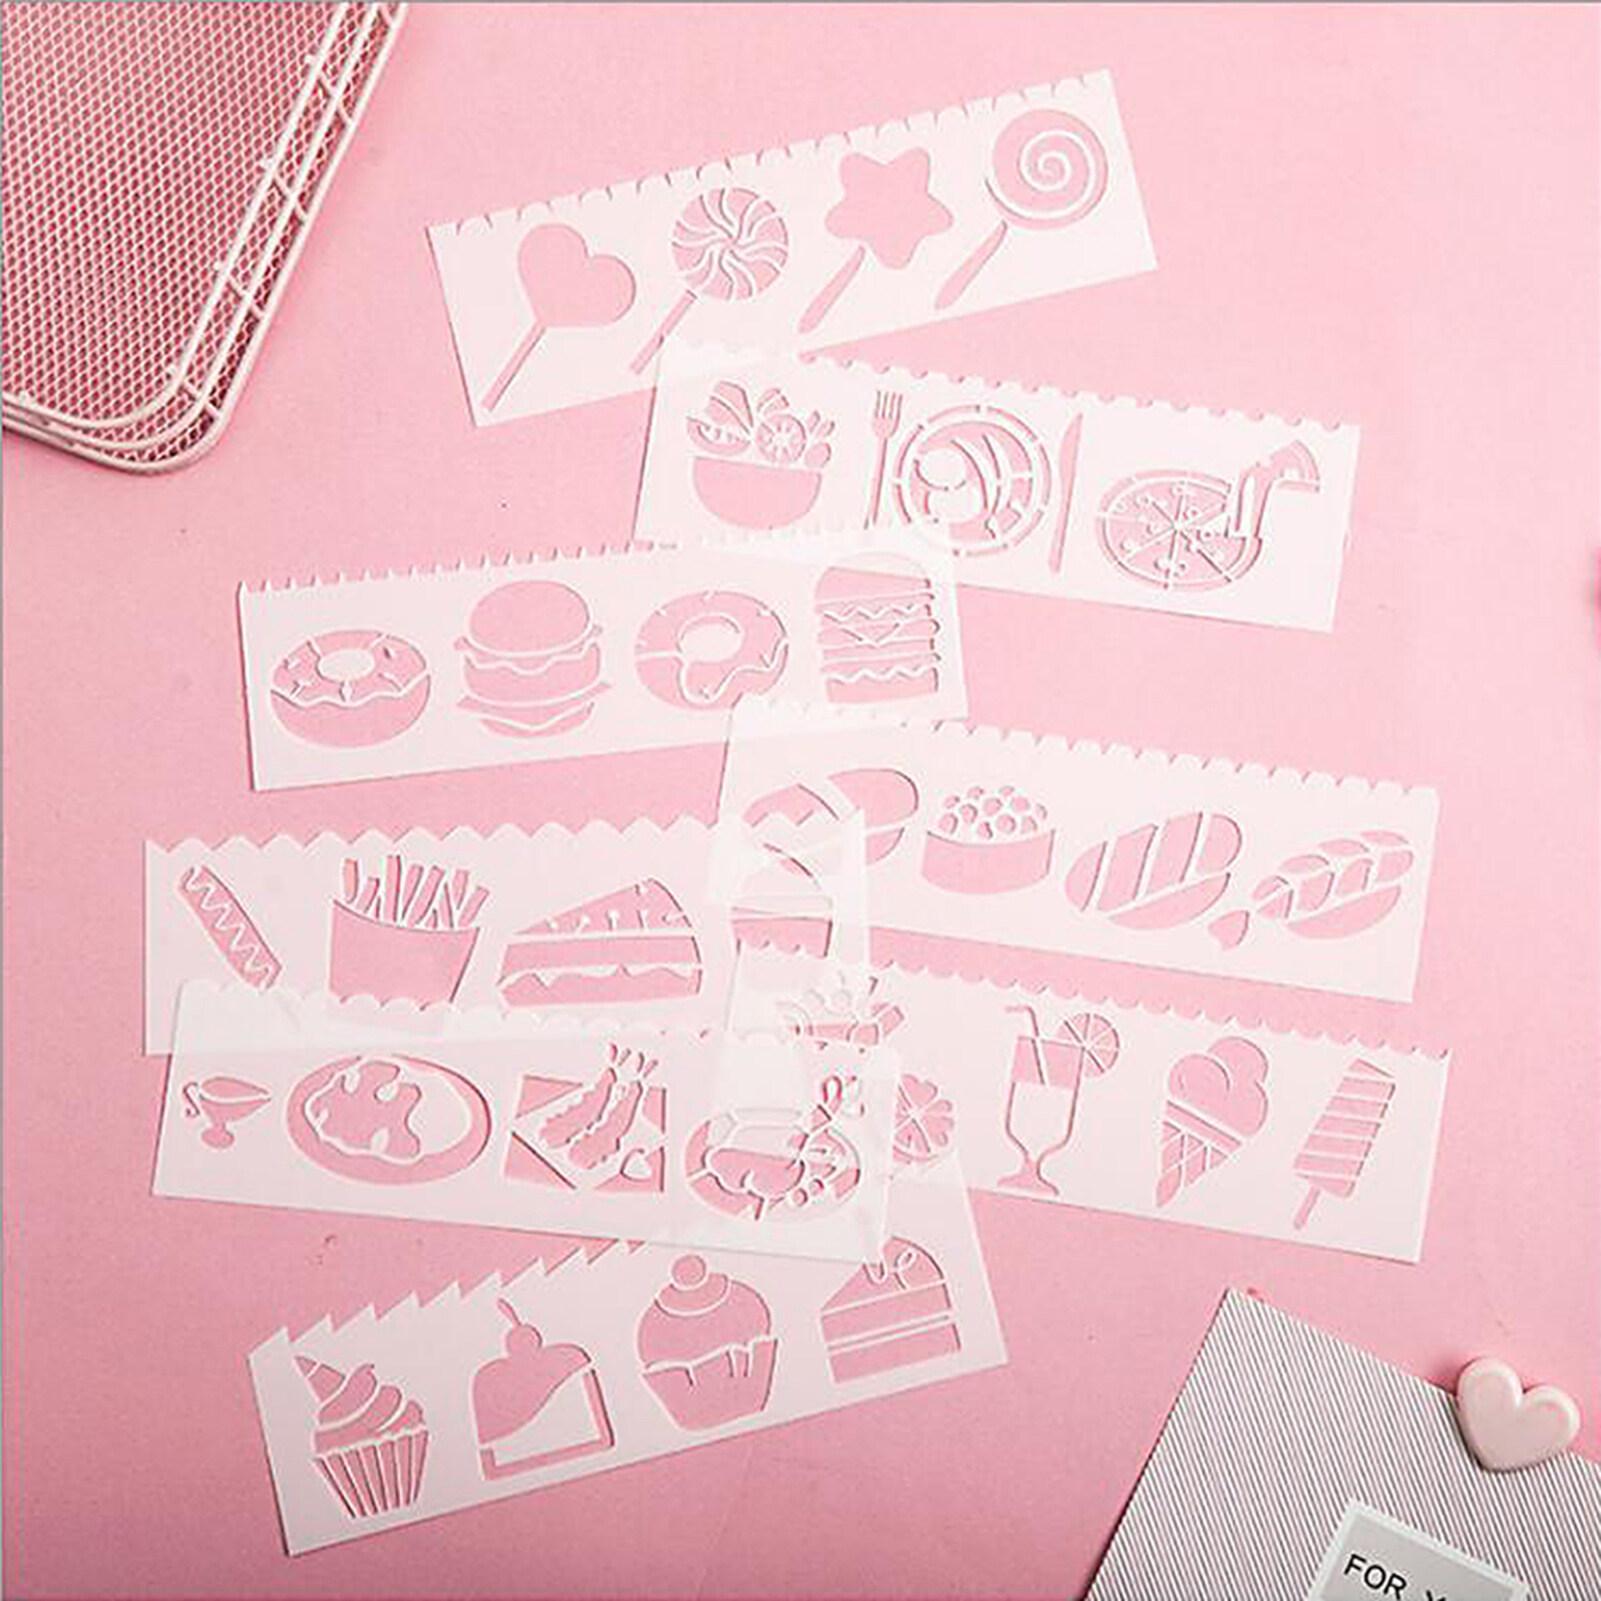 Multi-functional Drawing Stencils Straight & Wavy Lines Rulers Hollow Out Design PP Templates Reusable for Children Students DIY Painting Craft Scrapbooking Journal Photo Album Card Making